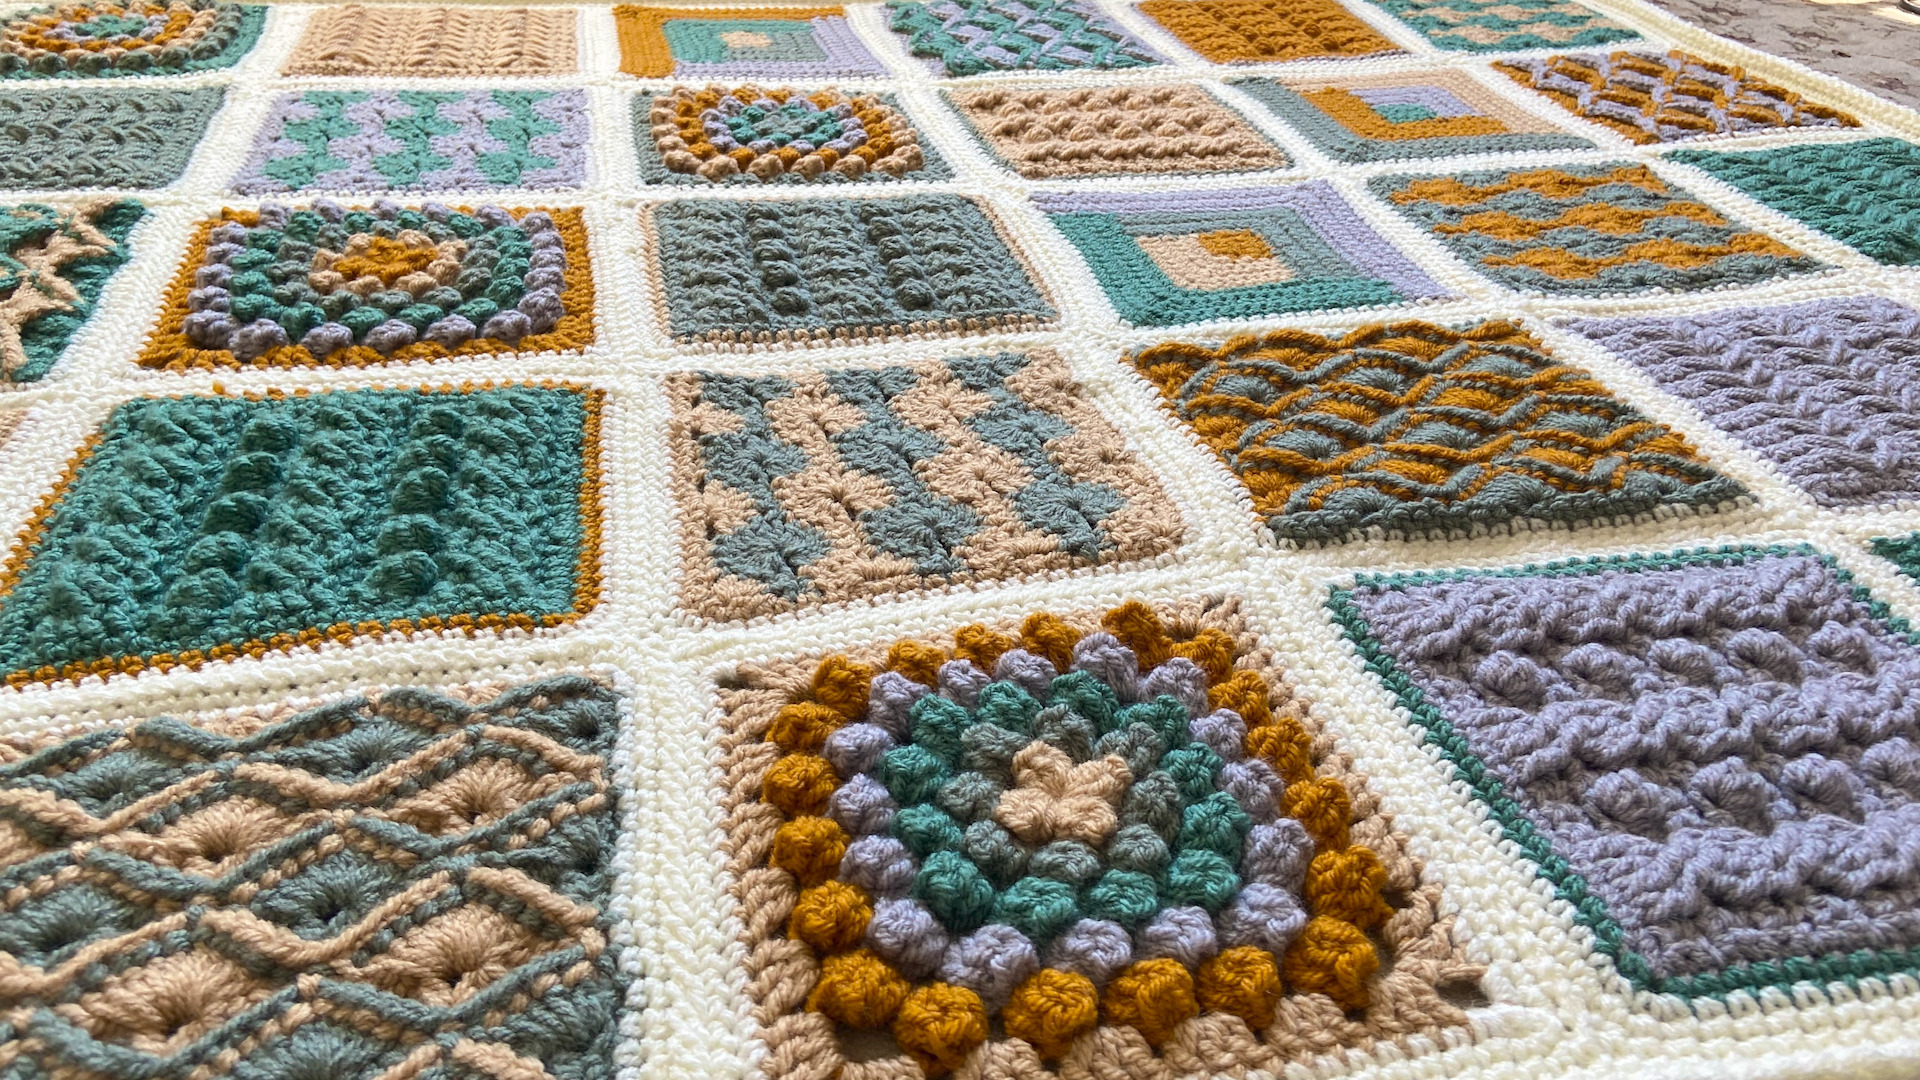 Loops & Threads® Chenille Home™ Grand Granny Square Throw, Projects